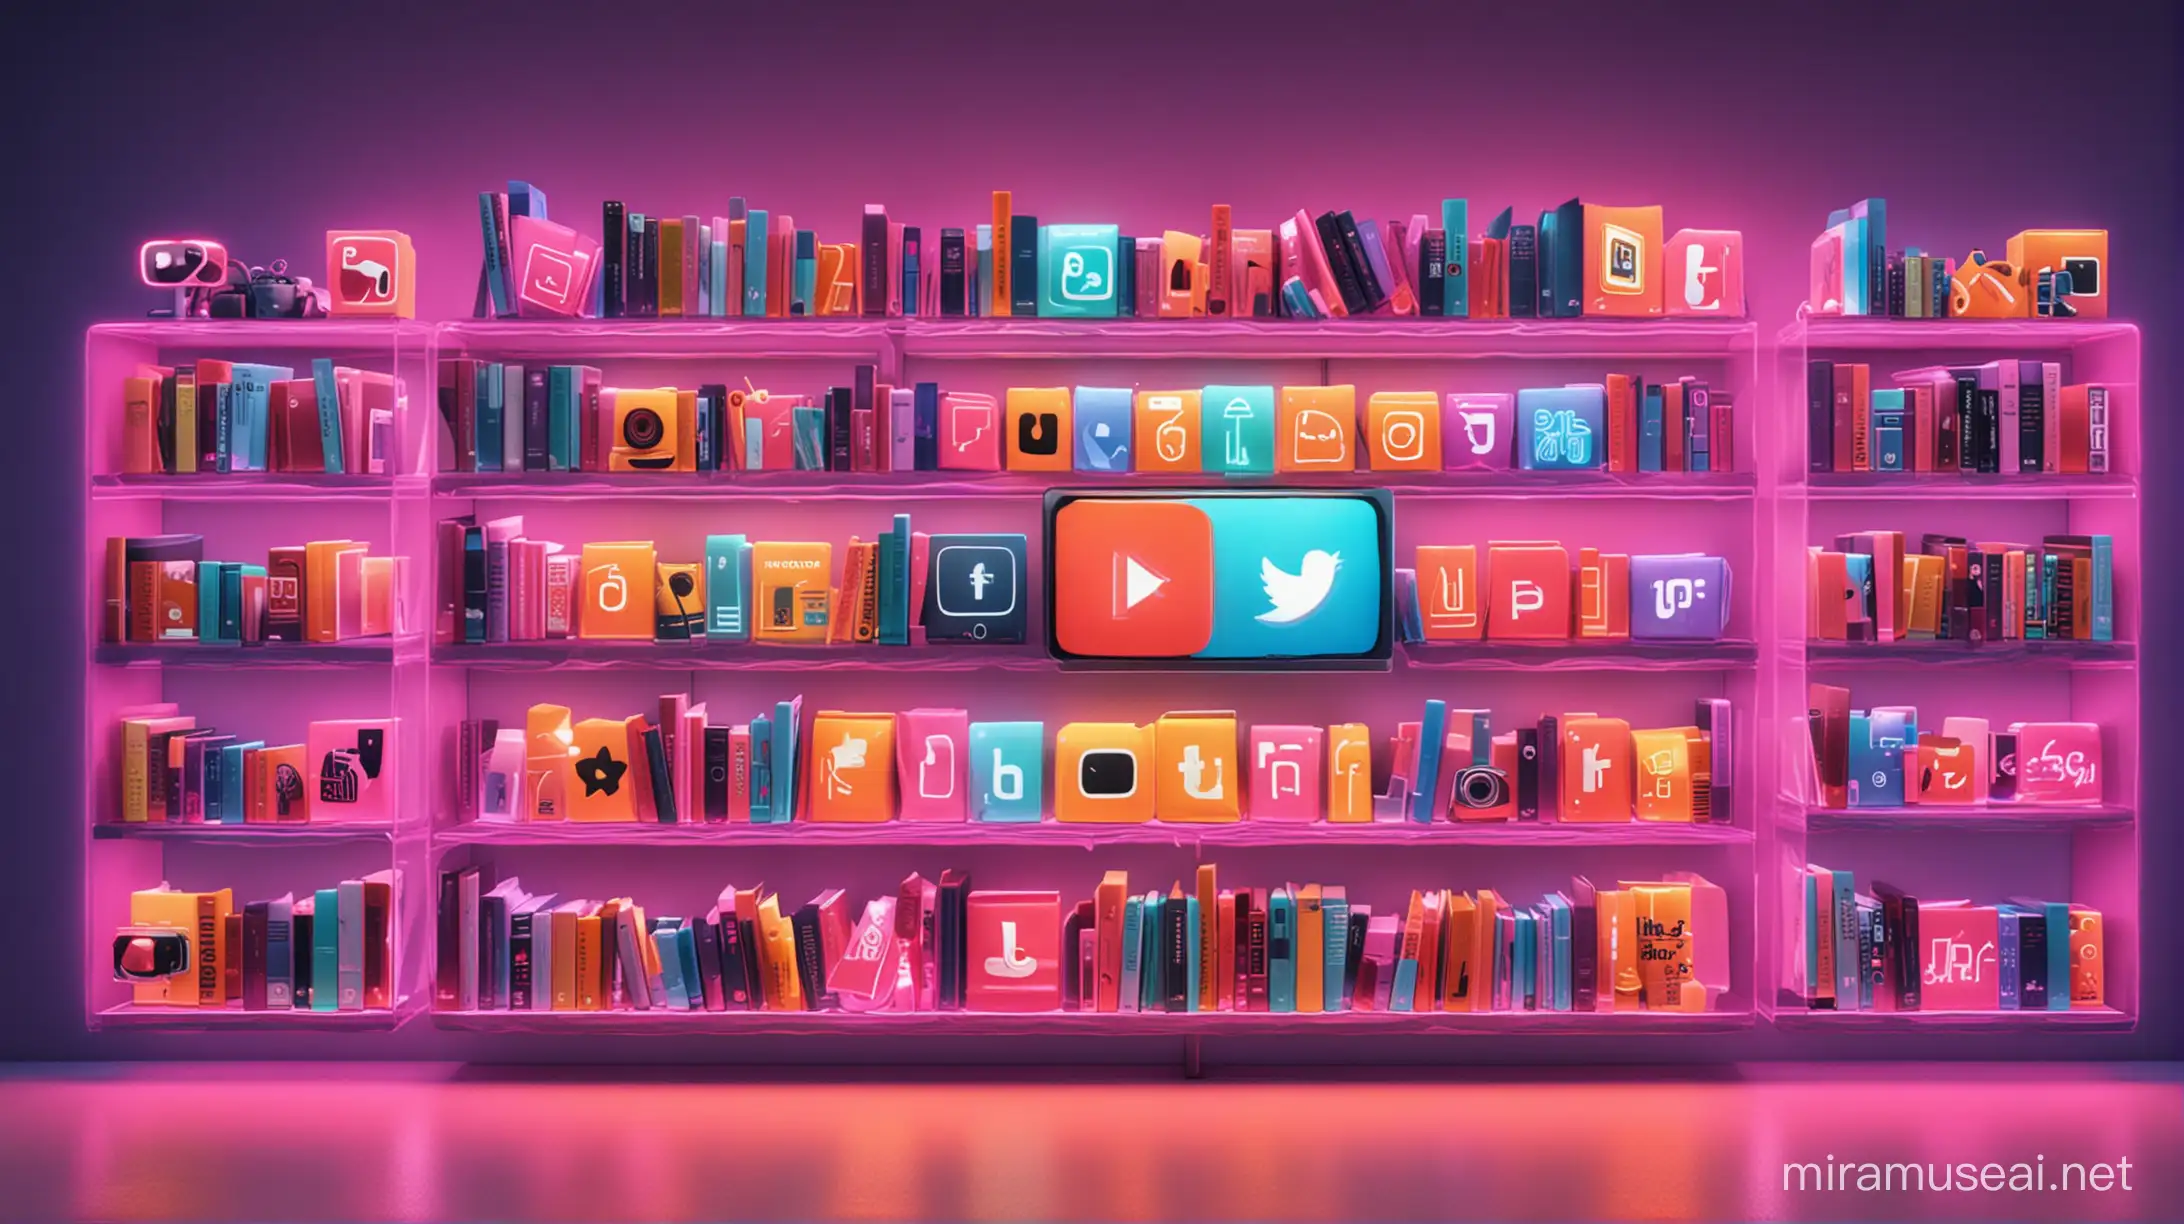 A 3D illustration in a vibrant neon color scheme: a library shelf overflowing with glowing books, videos, and images. Each item displays an icon representing a different social media platform (YouTube, Instagram, TikTok, etc.). Aspect ratio 16:9.